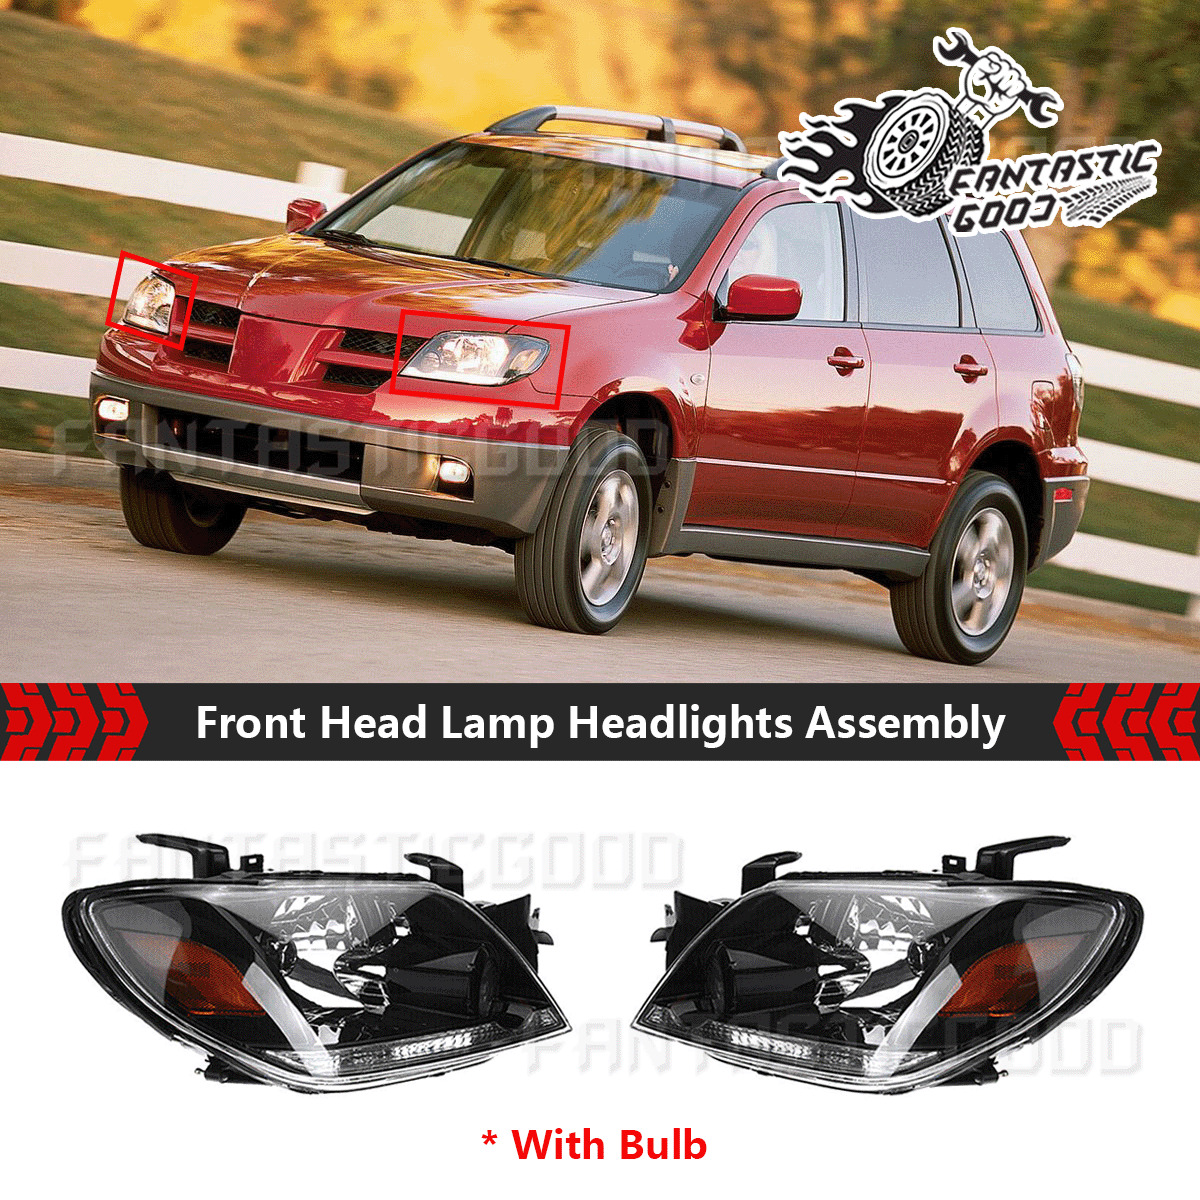 2x For MITSUBISHI Outlander 2003-05 Front Head Lamp Headlights Assembly W/ Bulb